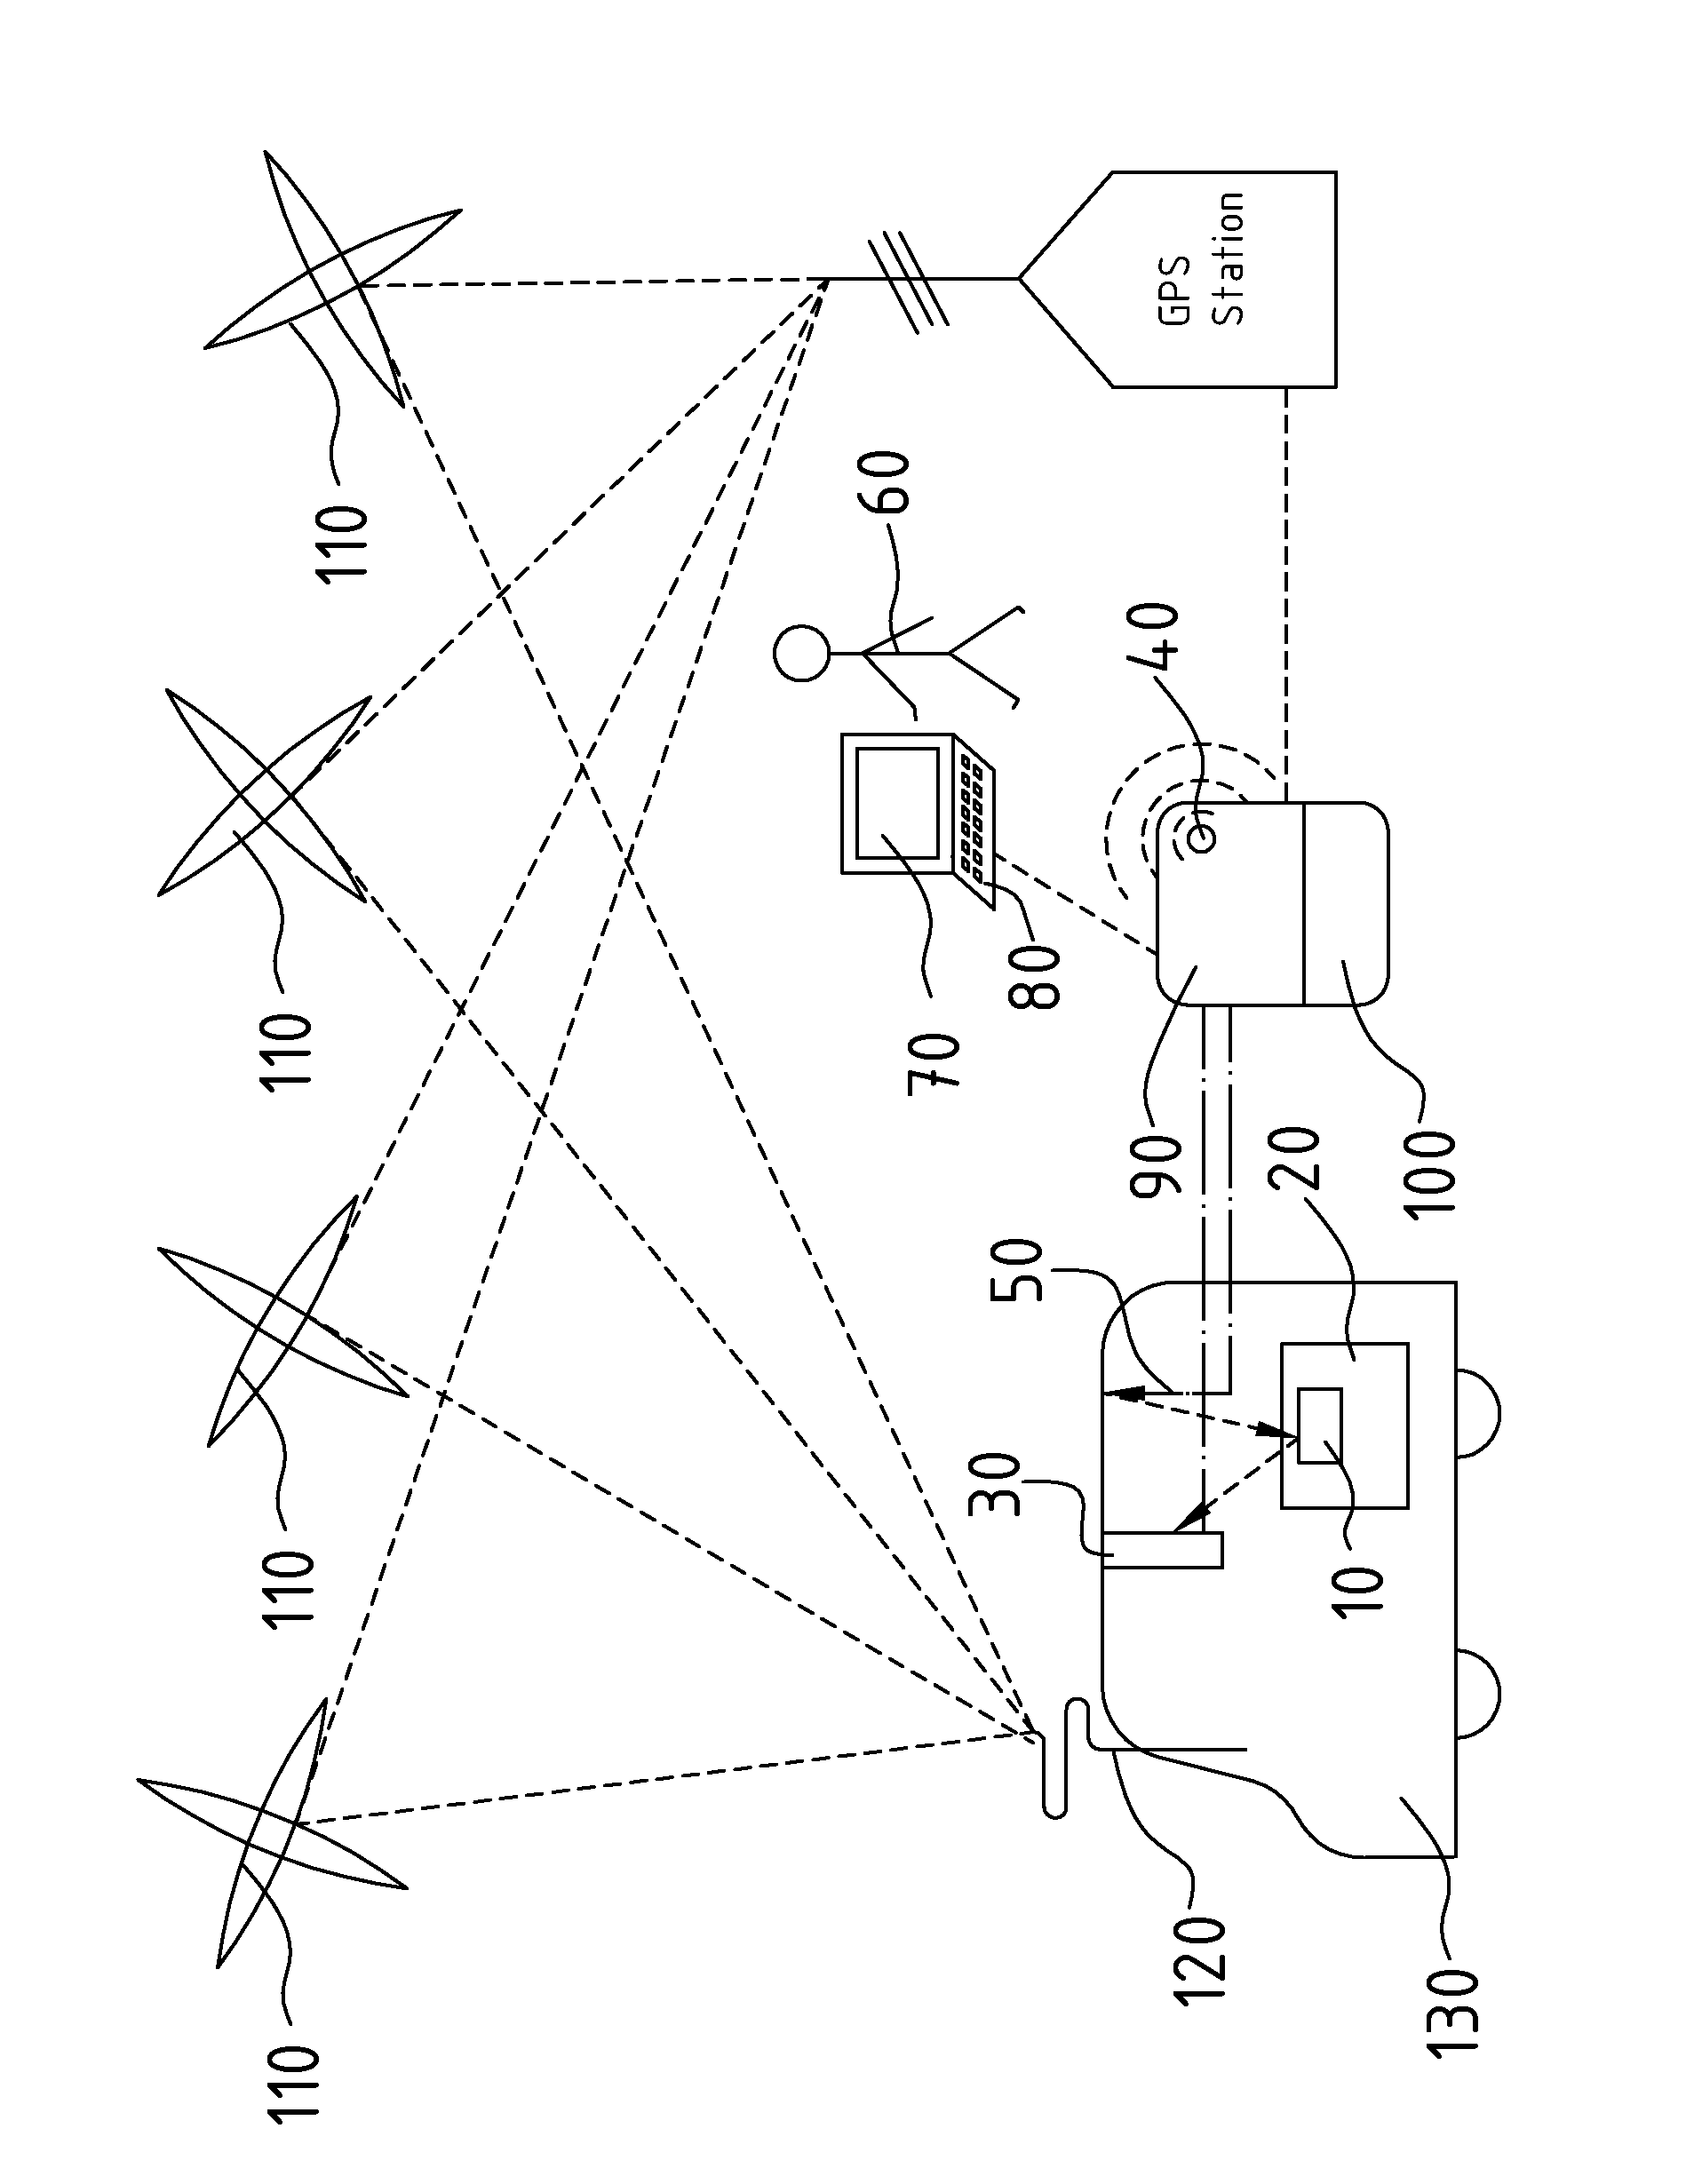 Monitoring device for a tracking system